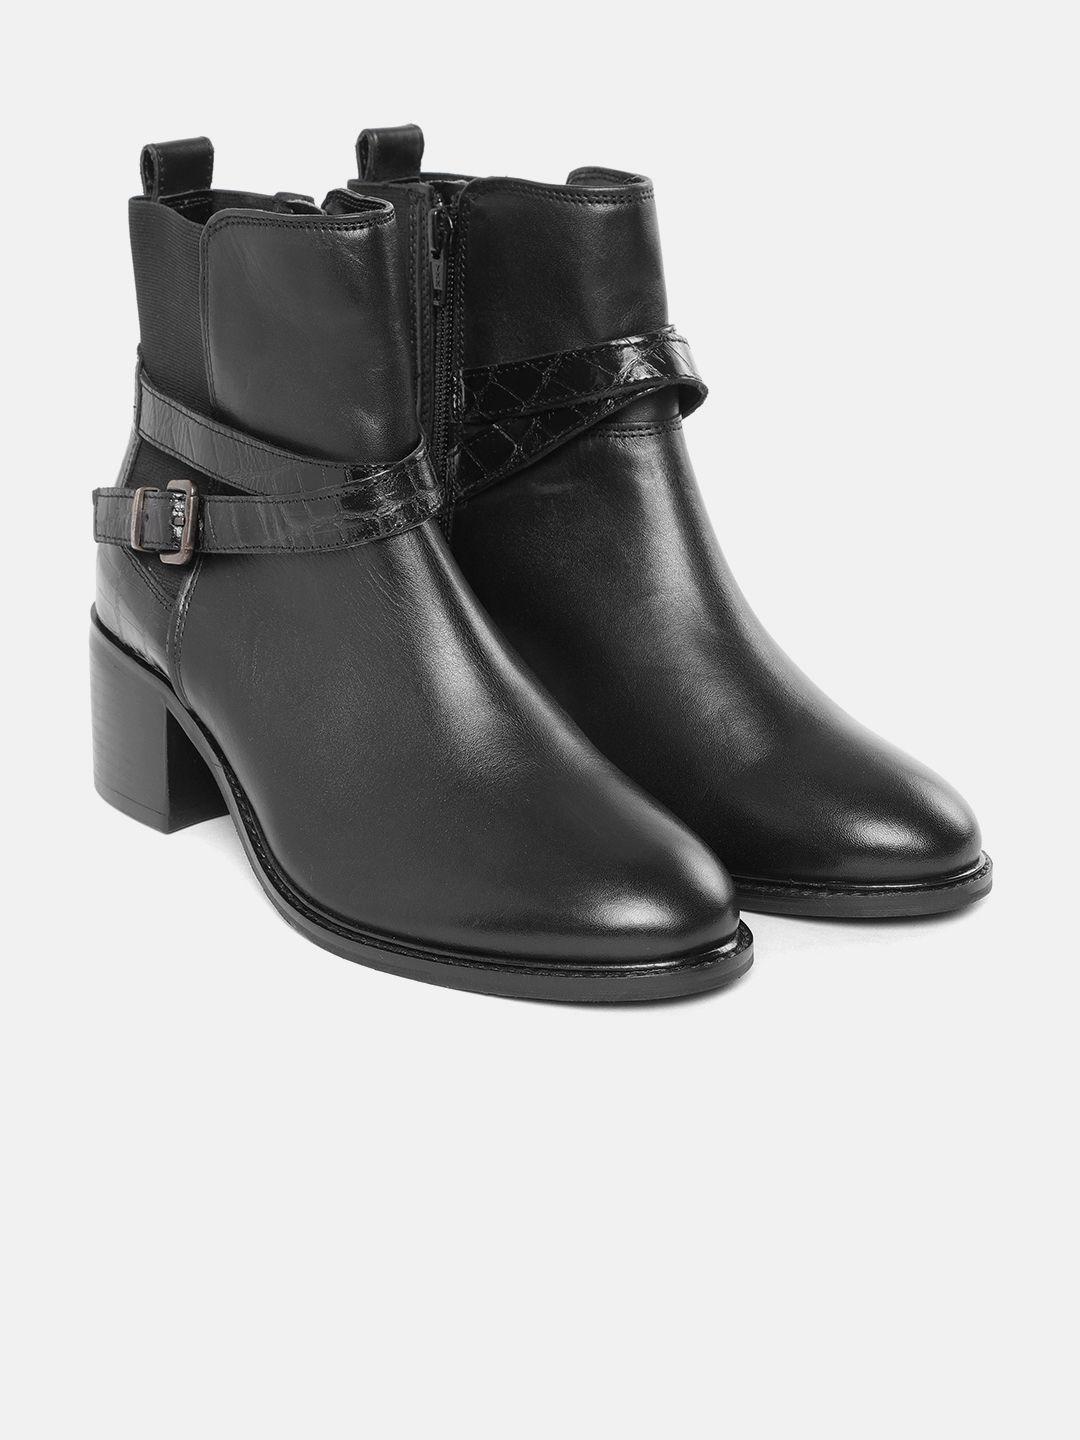 marks-&-spencer-women-black-leather-croc-textured-detail-mid-top-heeled-boots